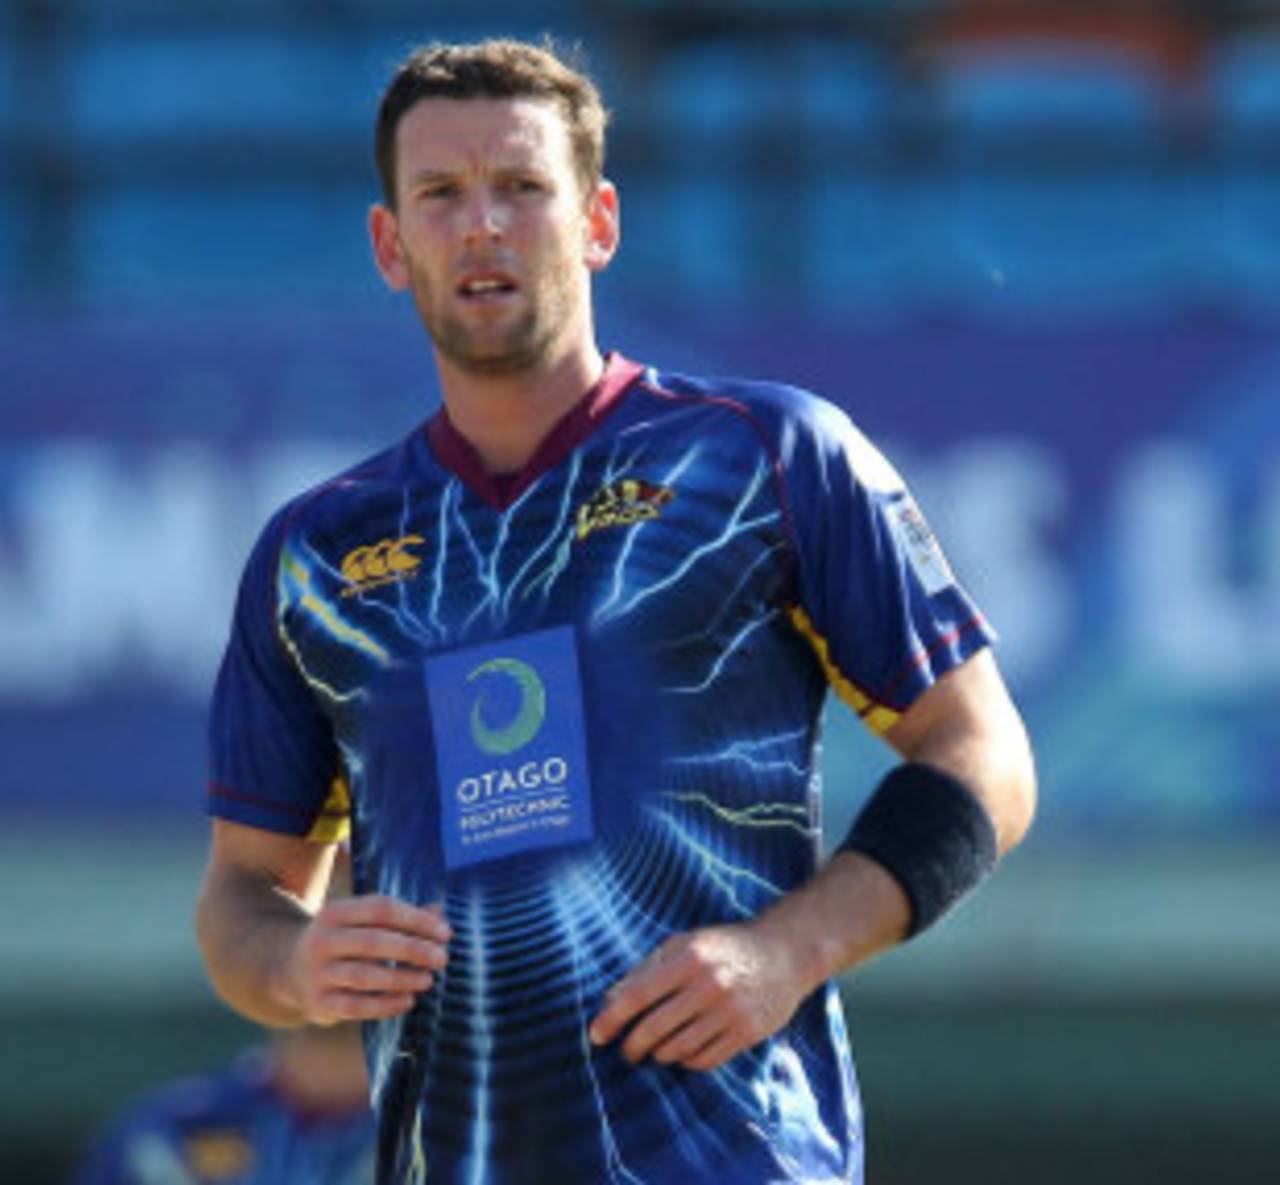 Otago's Ian Butler took three wickets in four balls, Kandurata Maroons v Otago Volts, Champions League qualifiers, Mohali, September 18, 2013